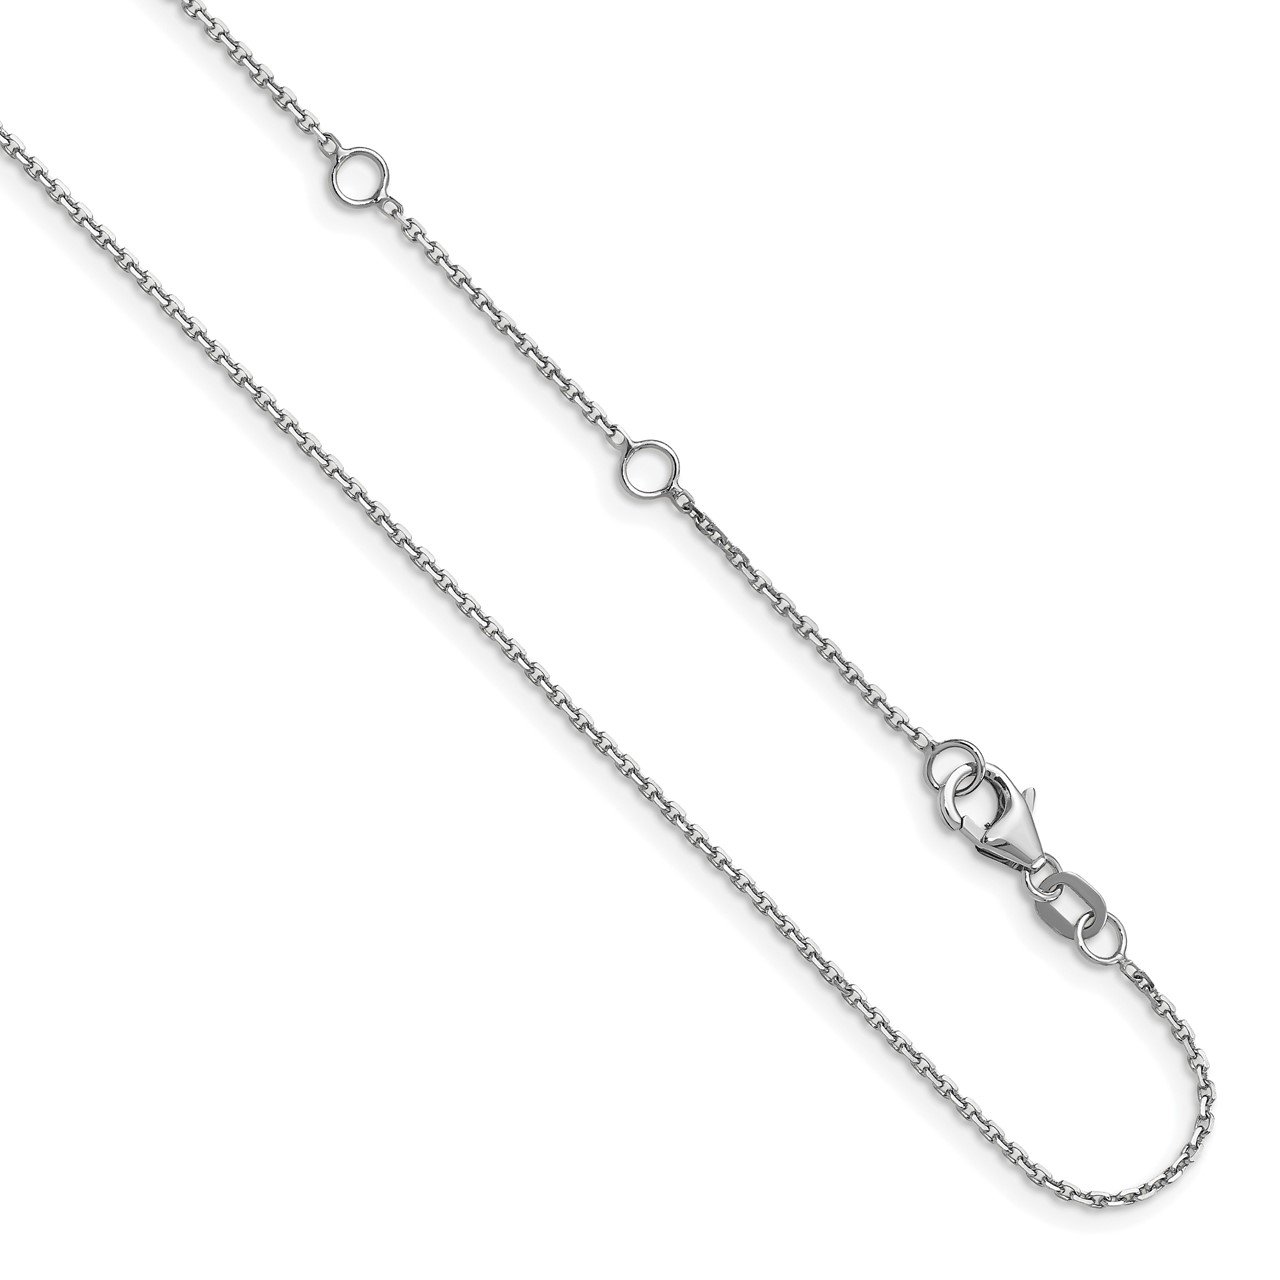 Leslie's 14k White Gold 1.1mm D/C Cable 1in+1in Adjustable Chain